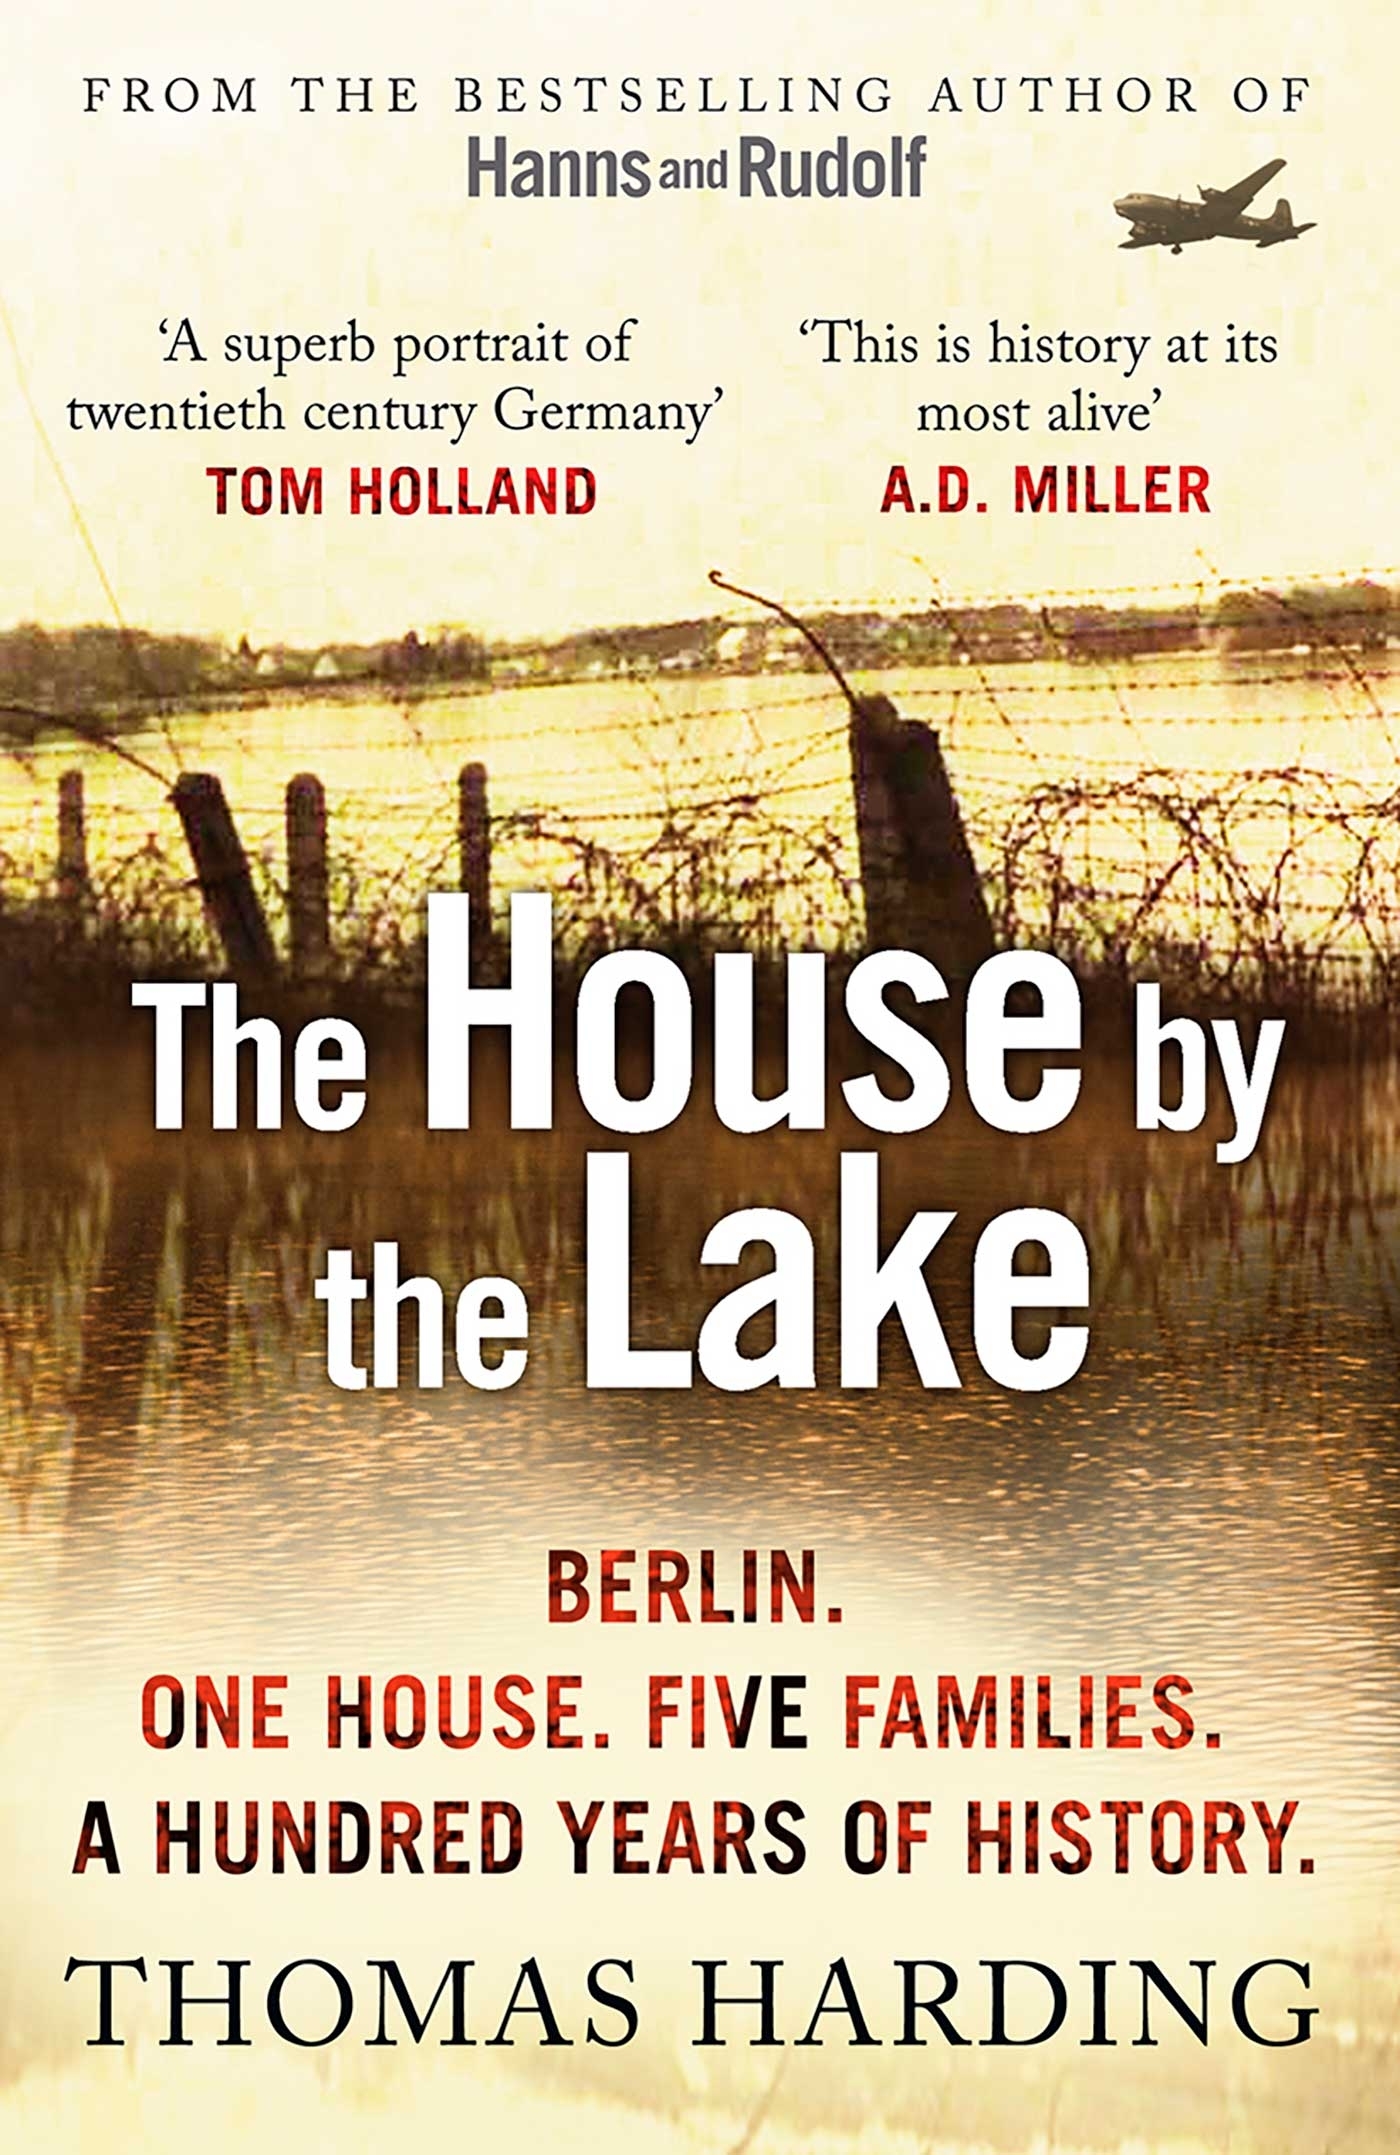 The House  by the Lake  by Thomas Harding Penguin Books  